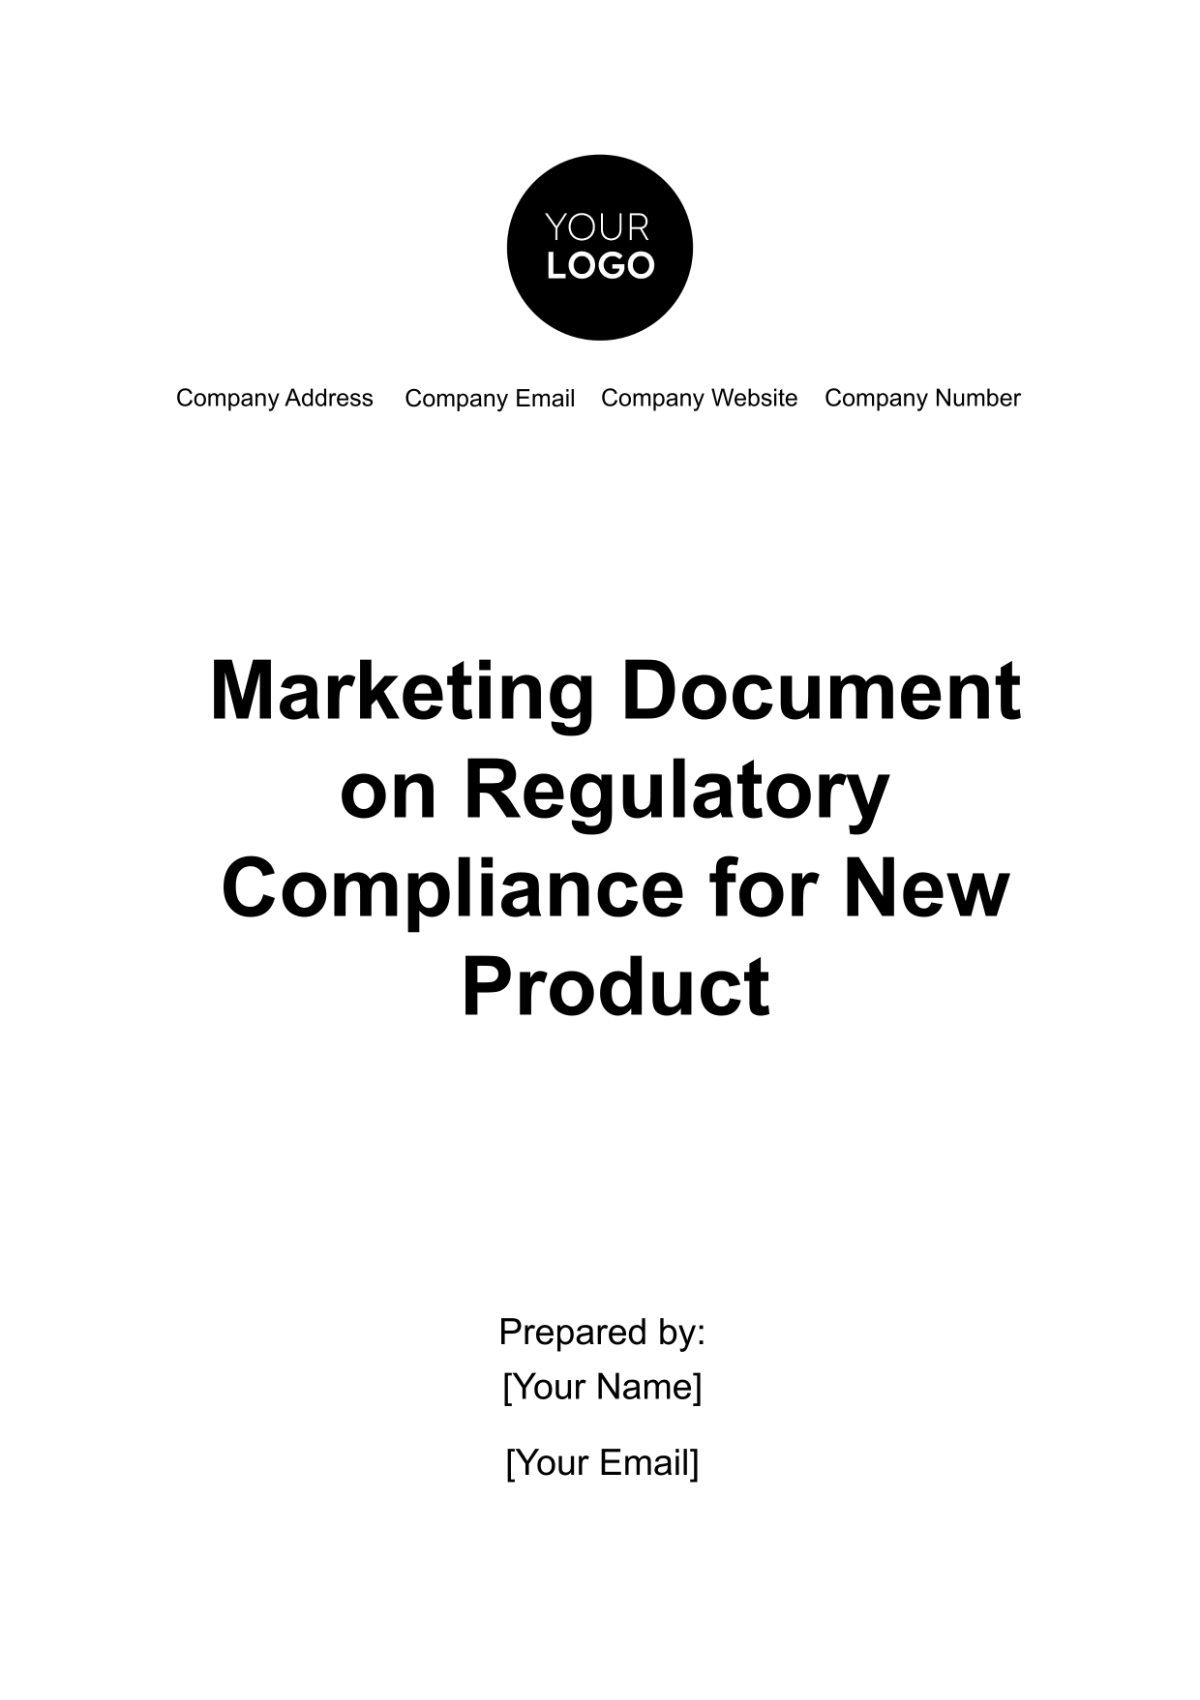 Marketing Document on Regulatory Compliance for New Product Template